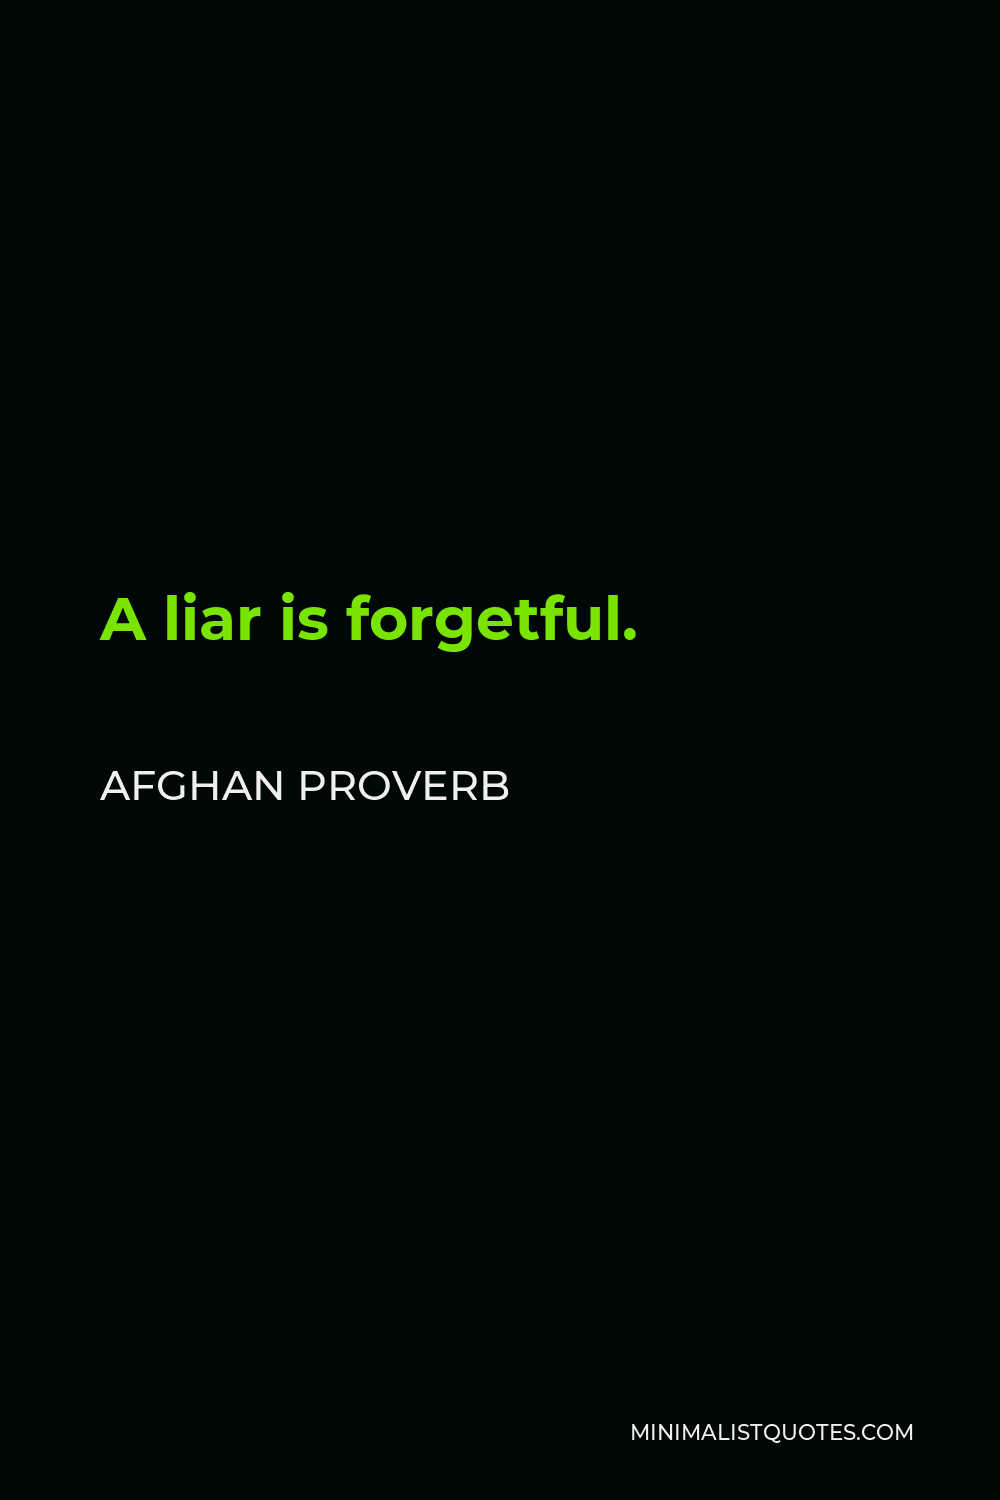 Afghan Proverb Quote - A liar is forgetful.